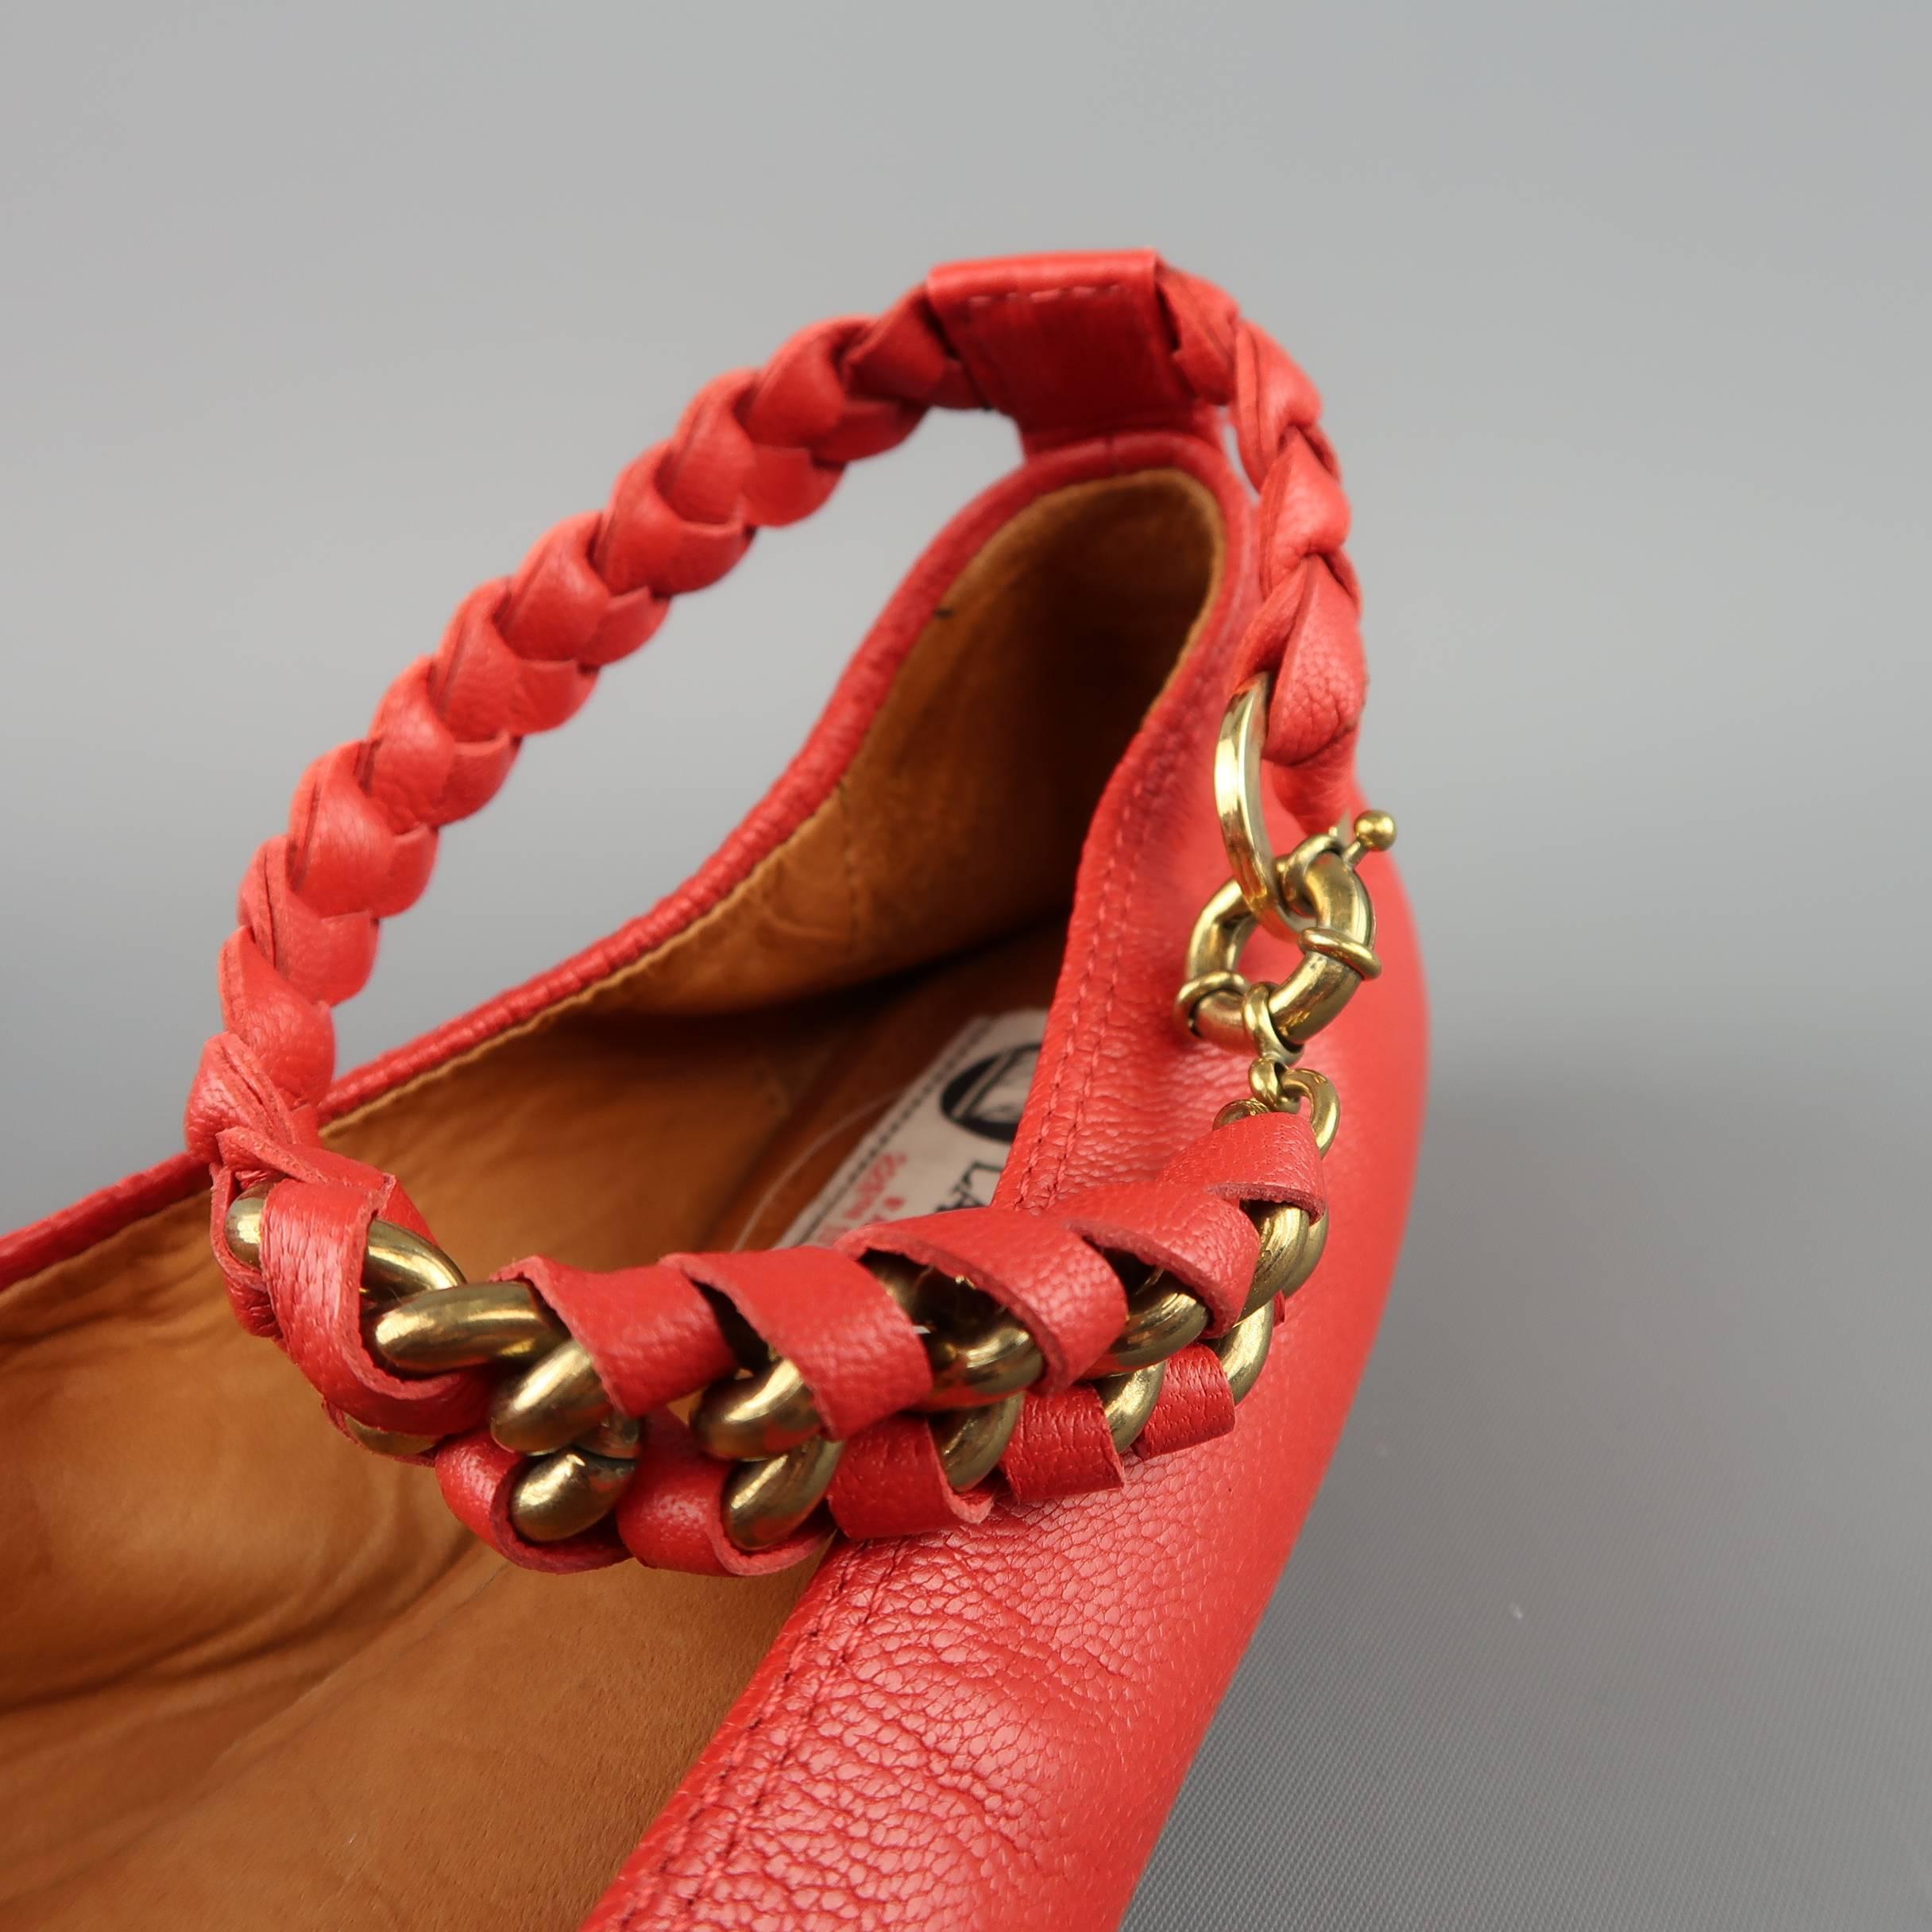 LANVIN ballet flats come in red leather with a round toe and braided leather and dark gold tone chain ankle strap. Made in Portugal.
 
Good Pre-Owned Condition.
Marked: IT 39
 
Measurements:
 
Outsole: 10 x 3.25 in.
